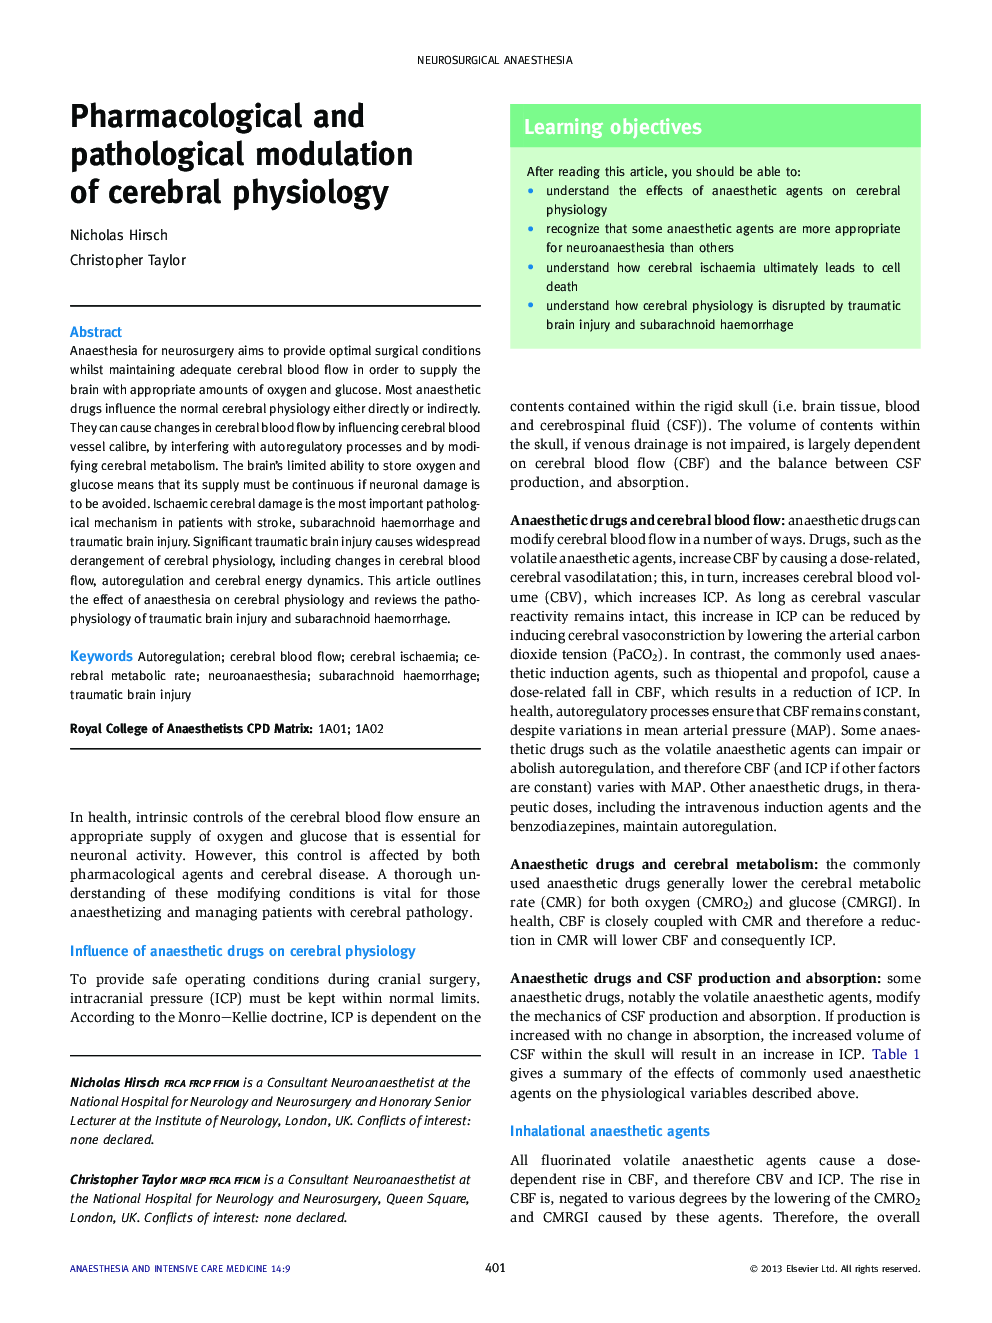 Pharmacological and pathological modulation of cerebral physiology